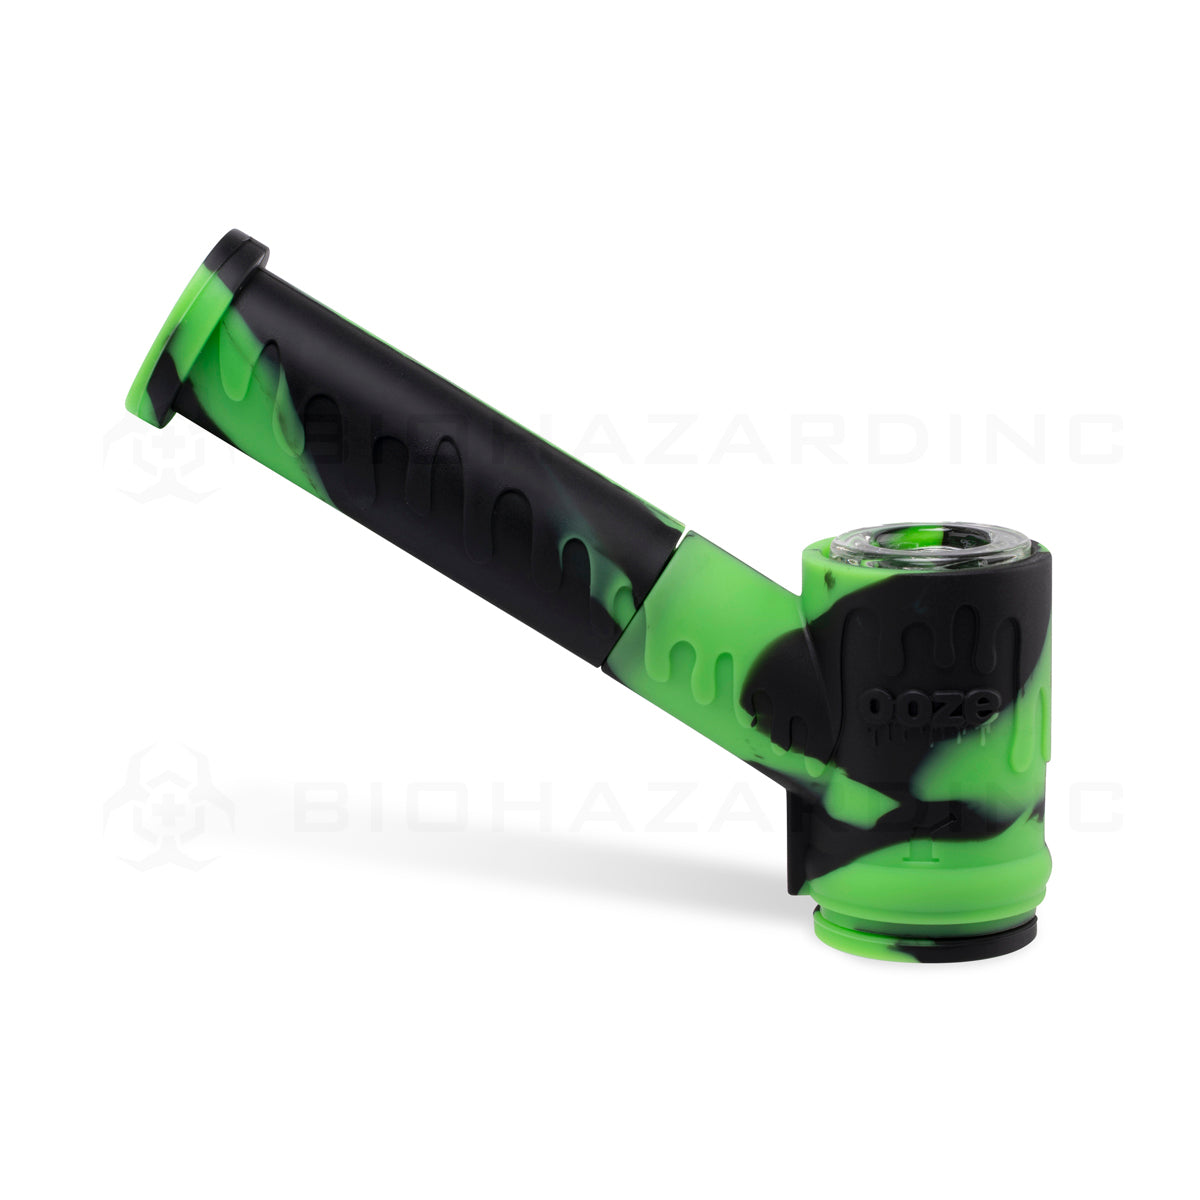 OOZE® | 4-in-1 MOJO Hybrid Silicone Nectar Collector & Water Pipe  Ooze   